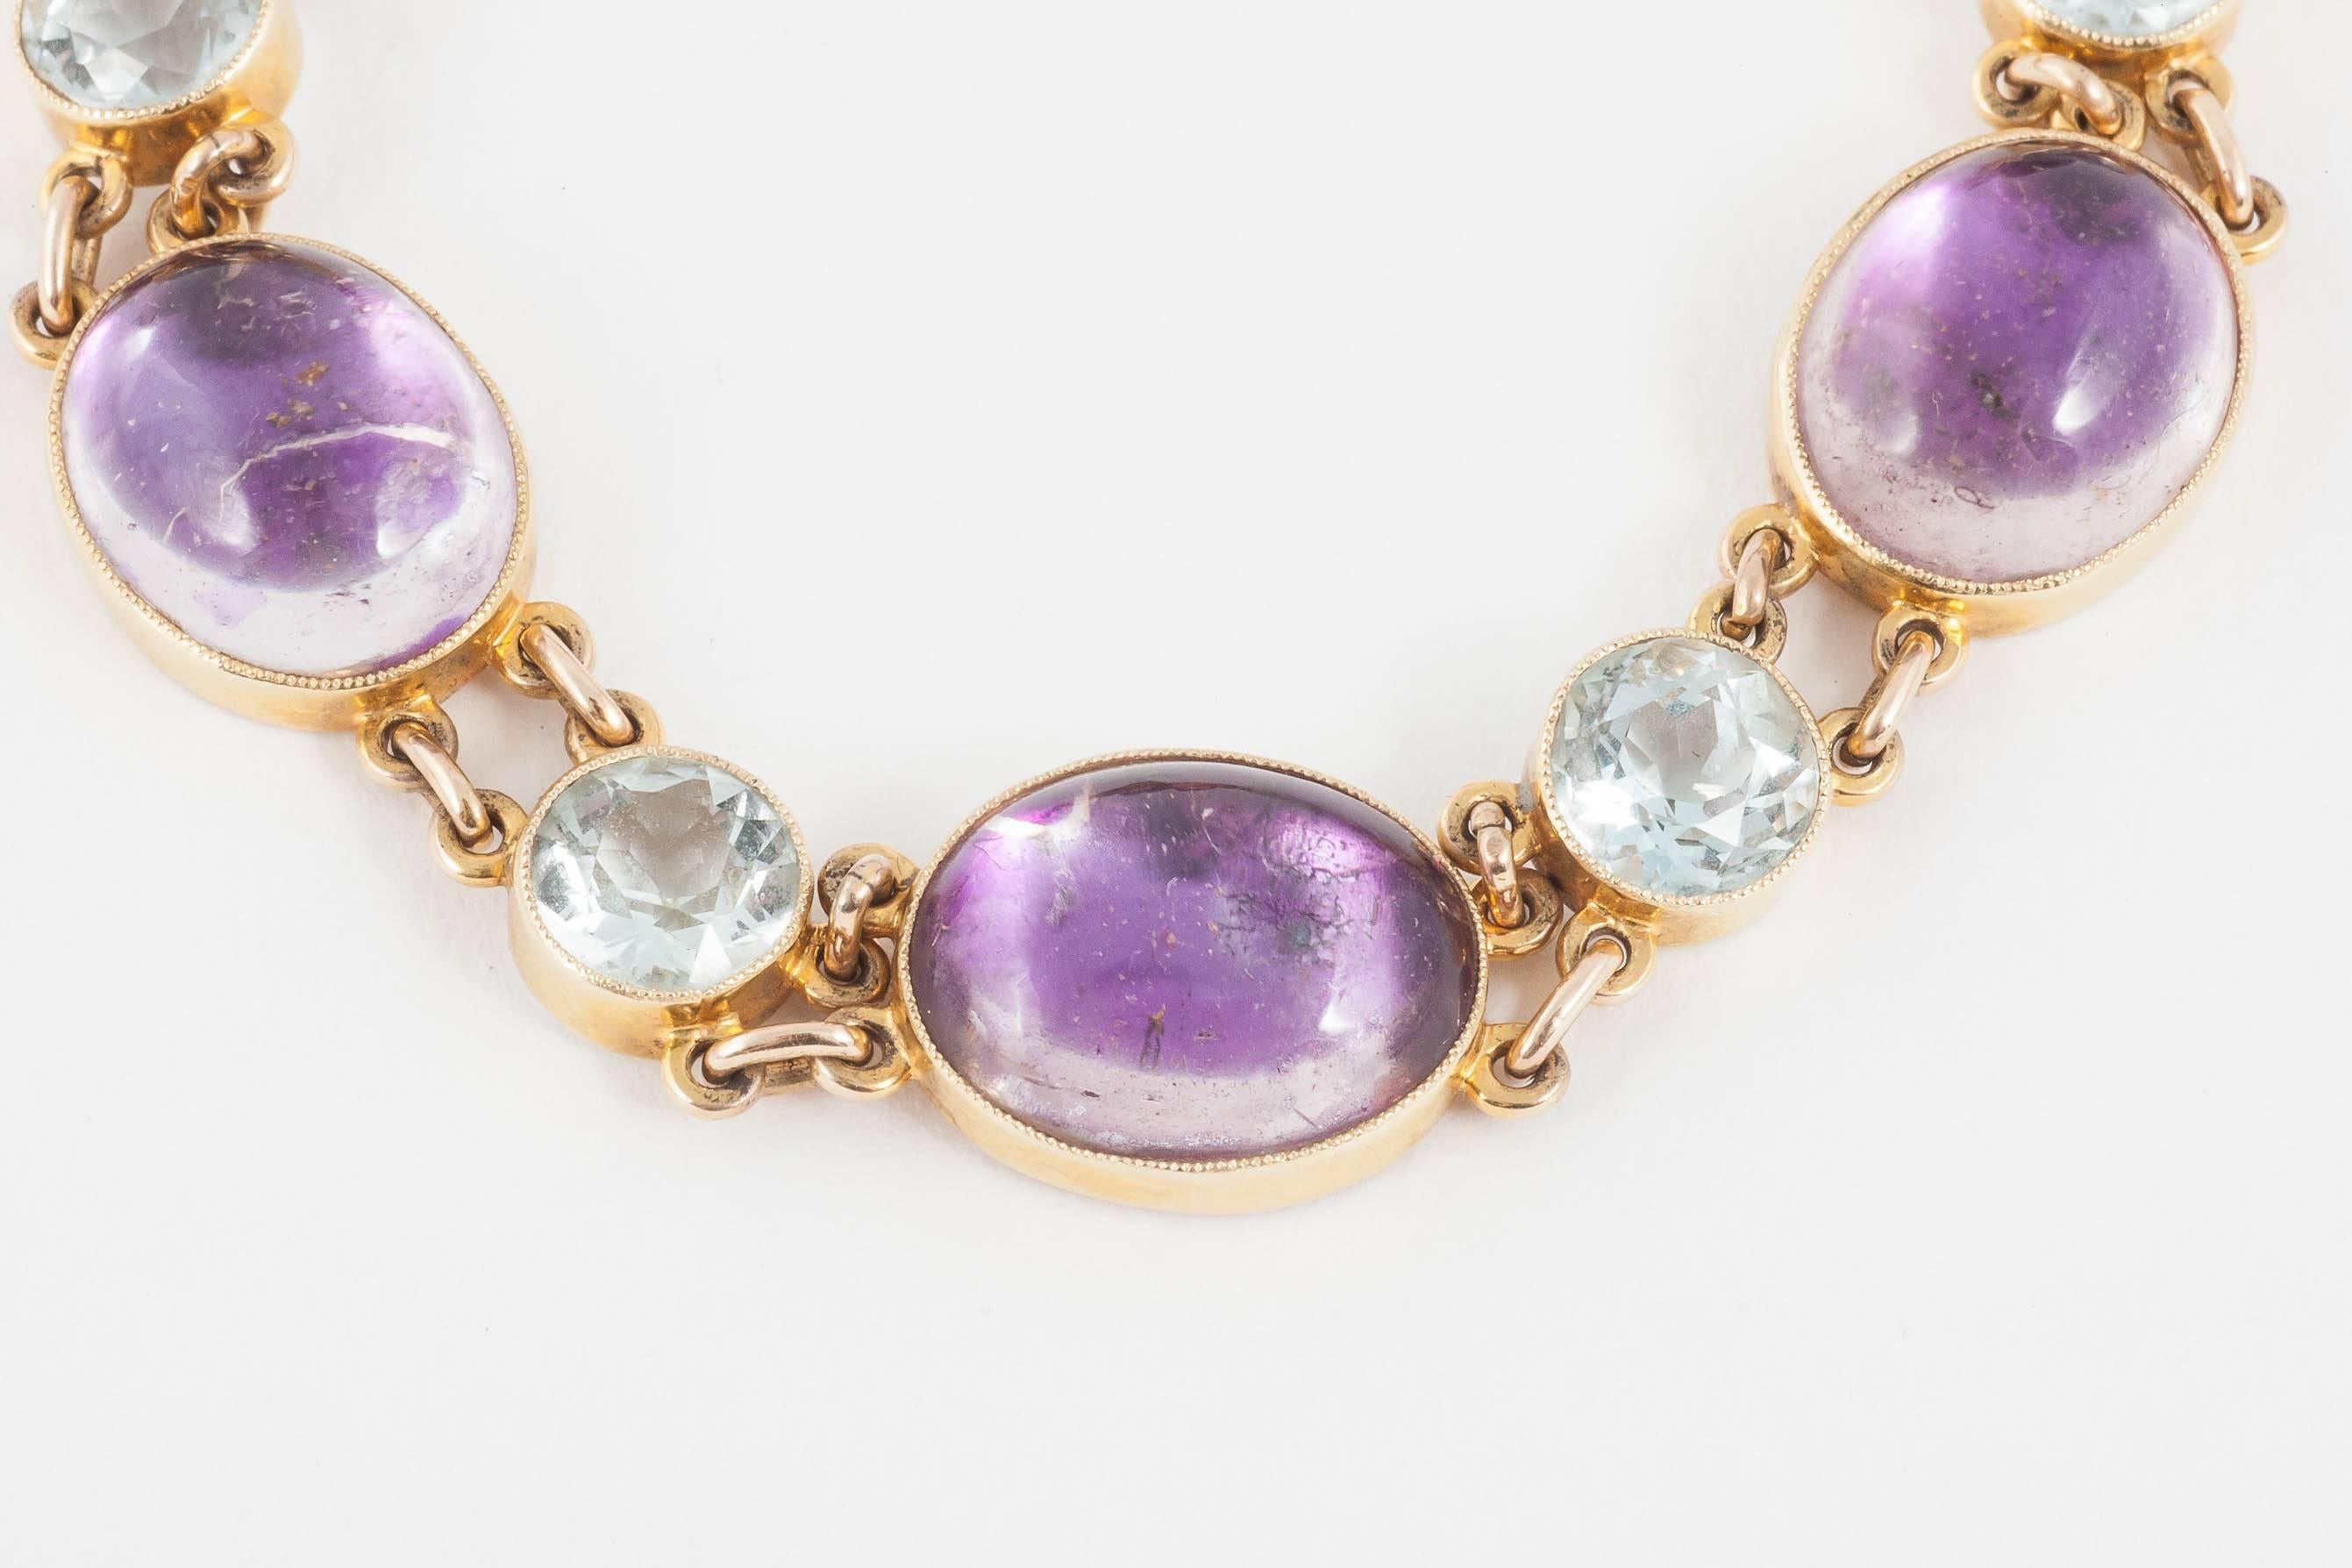 This bracelet in 15ct is set with alternating cabochon cut foiled Amethysts and round Aquamarines in rub over settings.
